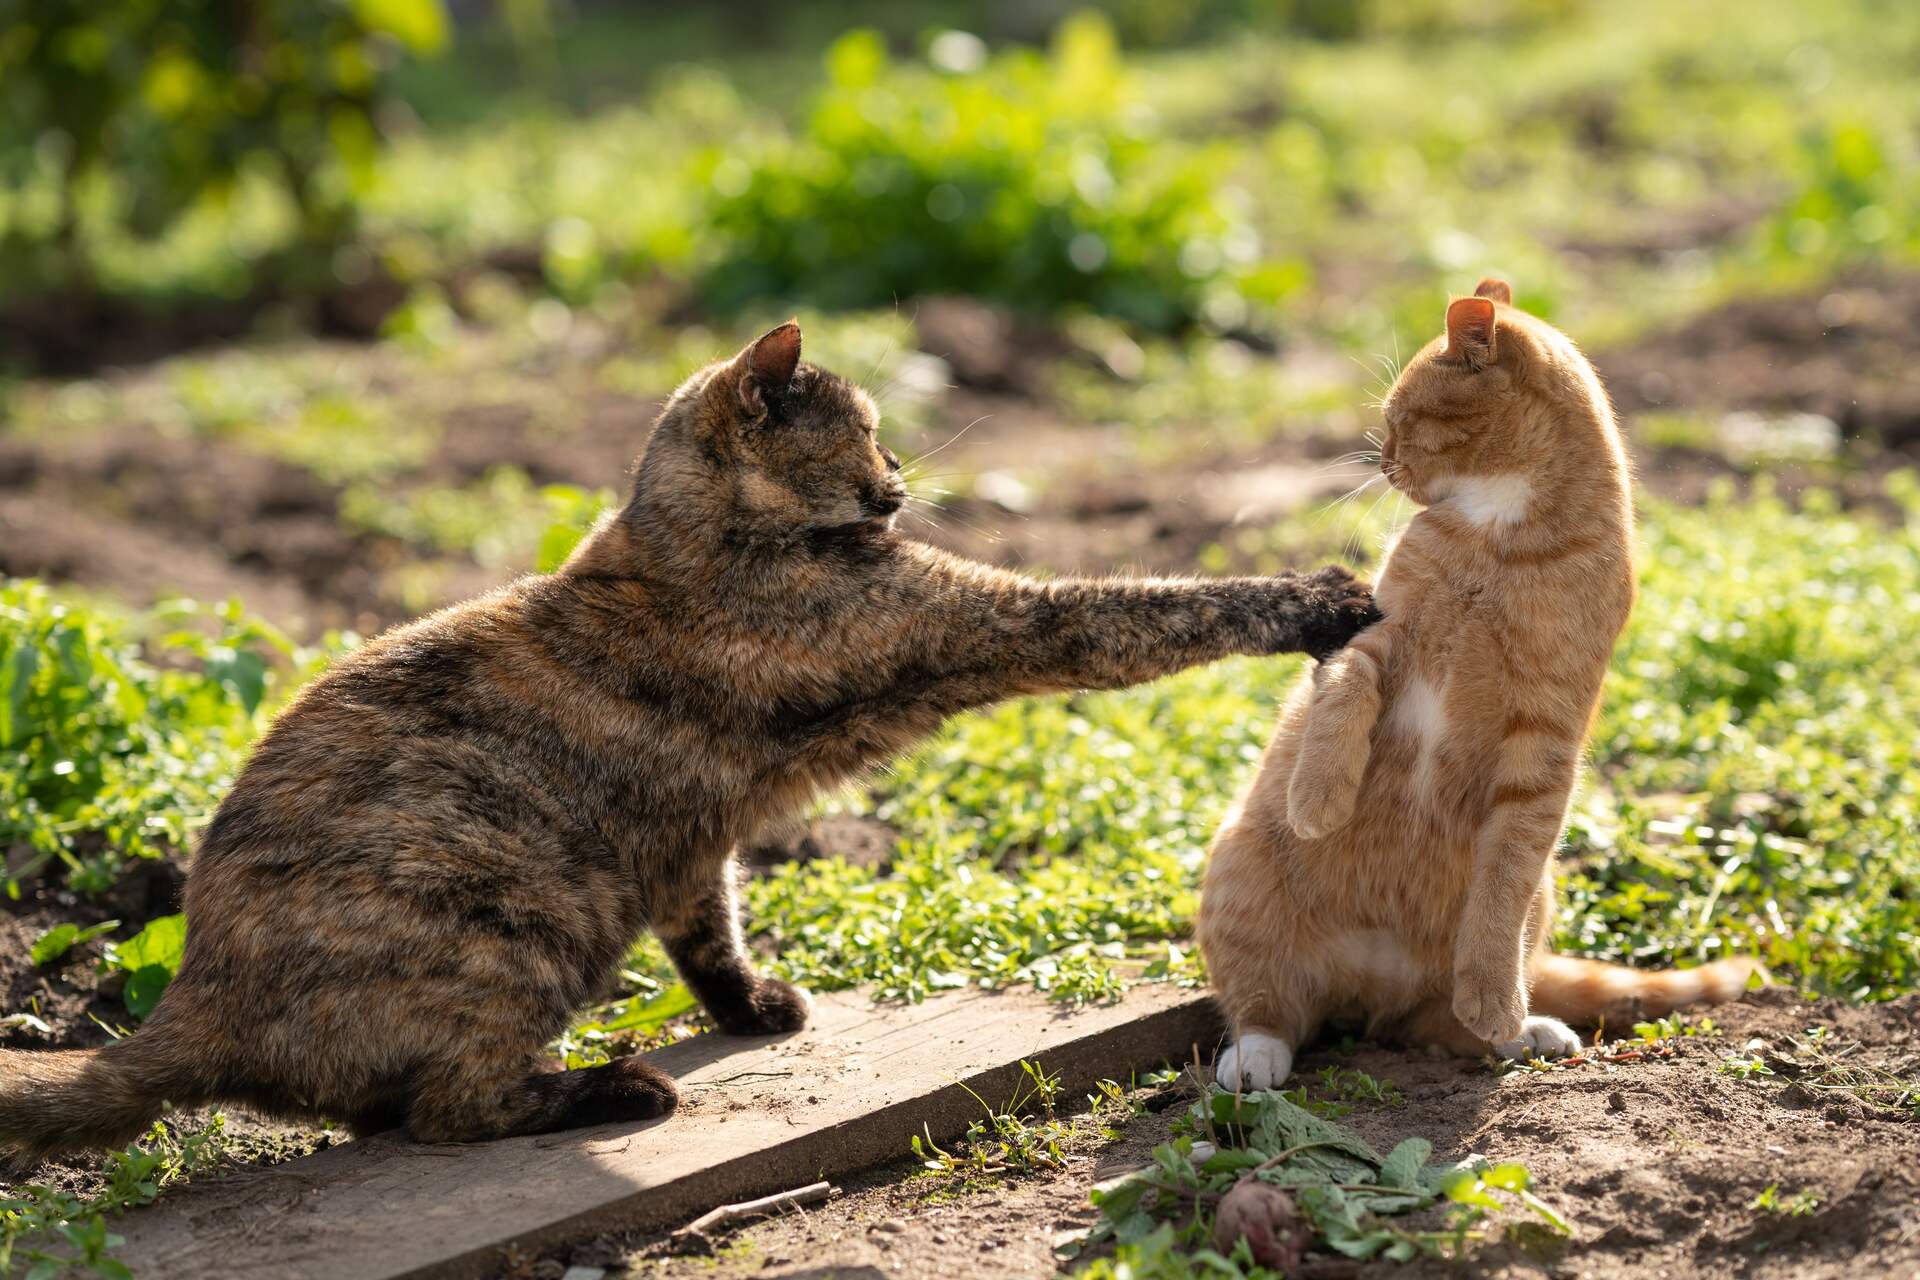 A cat pawing at another cat in a garden